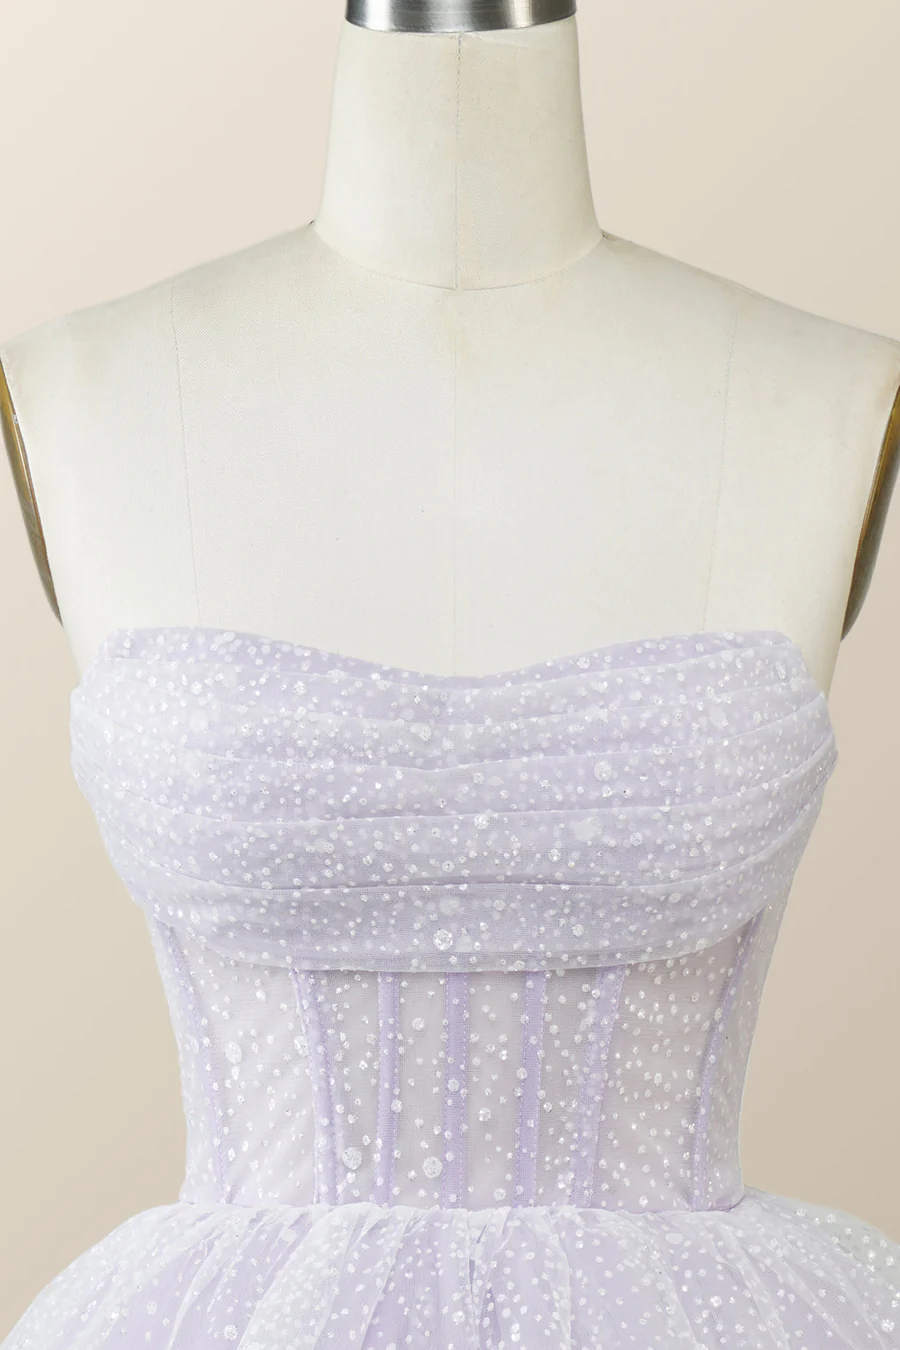 Lavender Strapless Cowl Neck Short A-line Homecoming Dress  Y2780